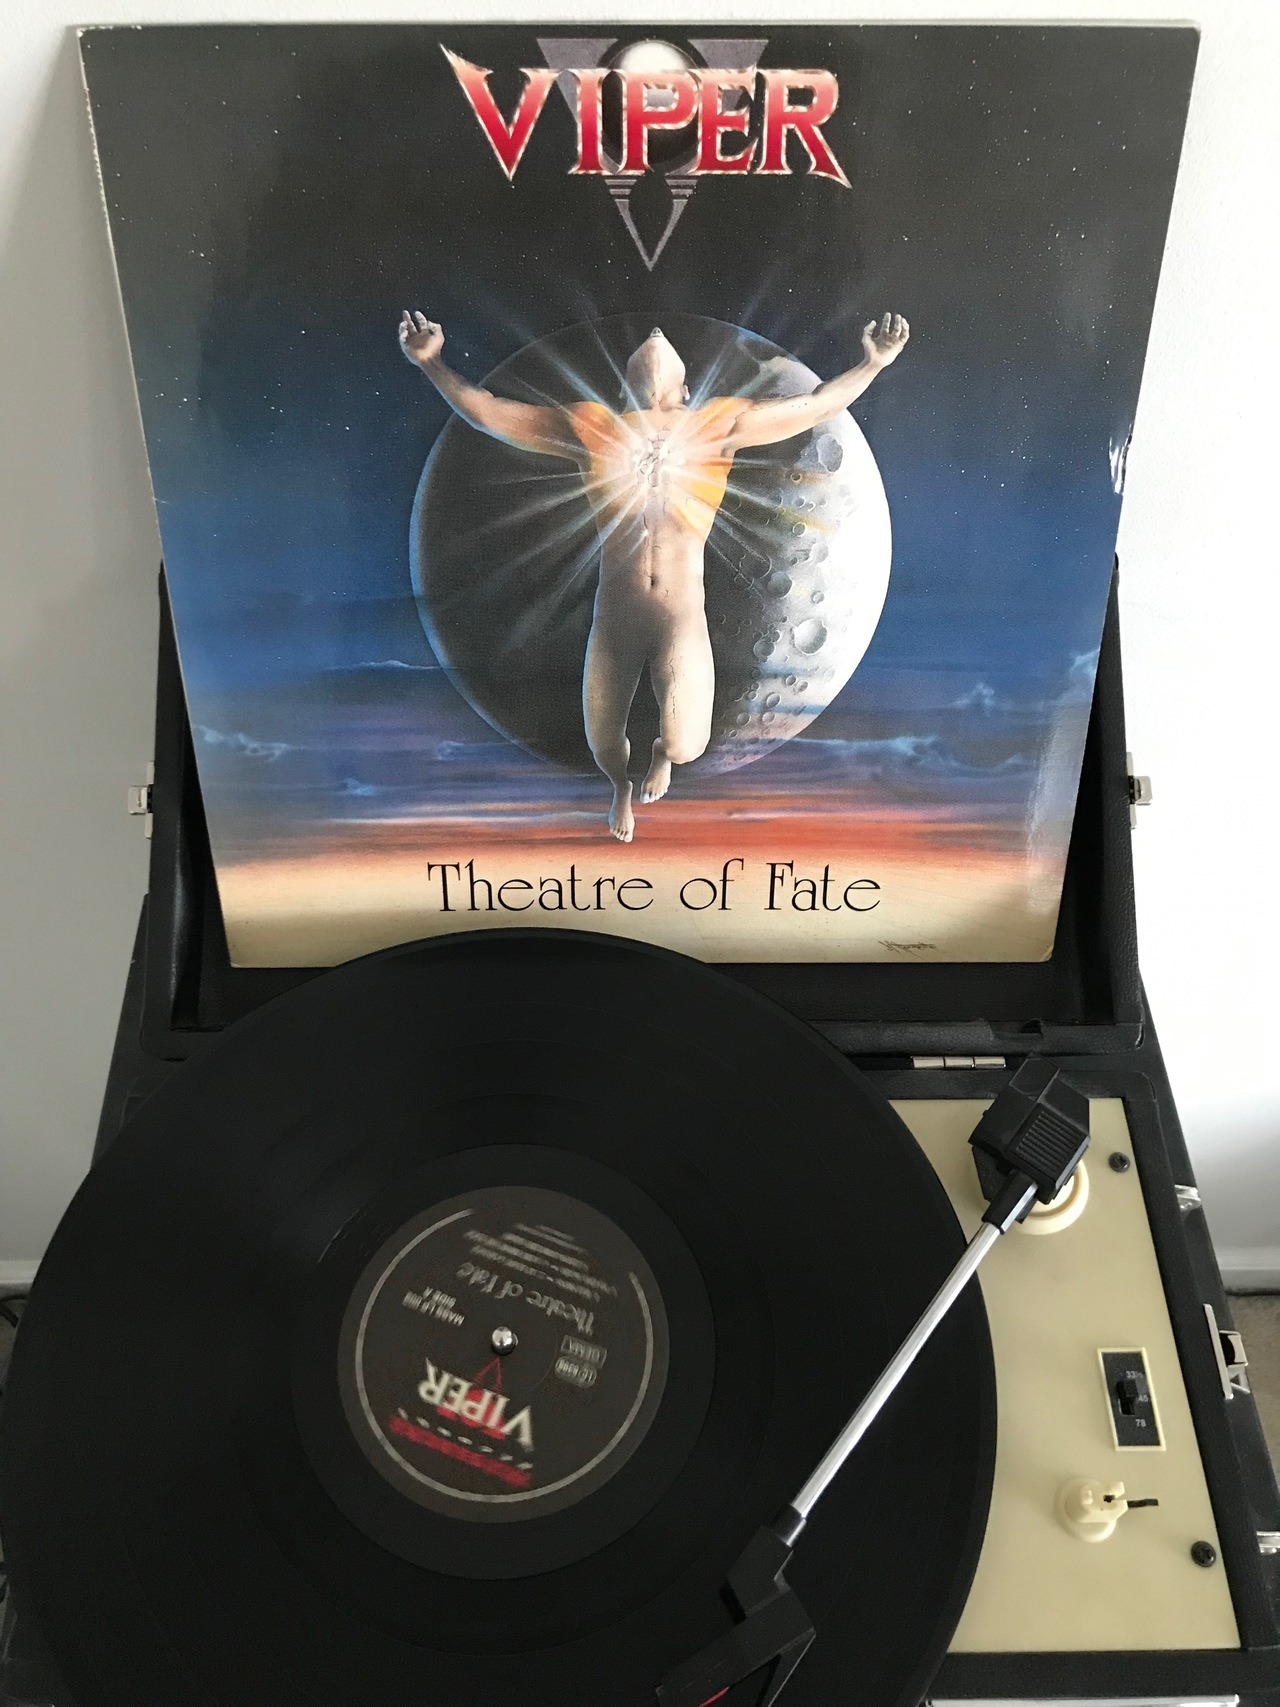 Crappy Turntable, Awesome Records — Viper: Theatre of Fate (1989 